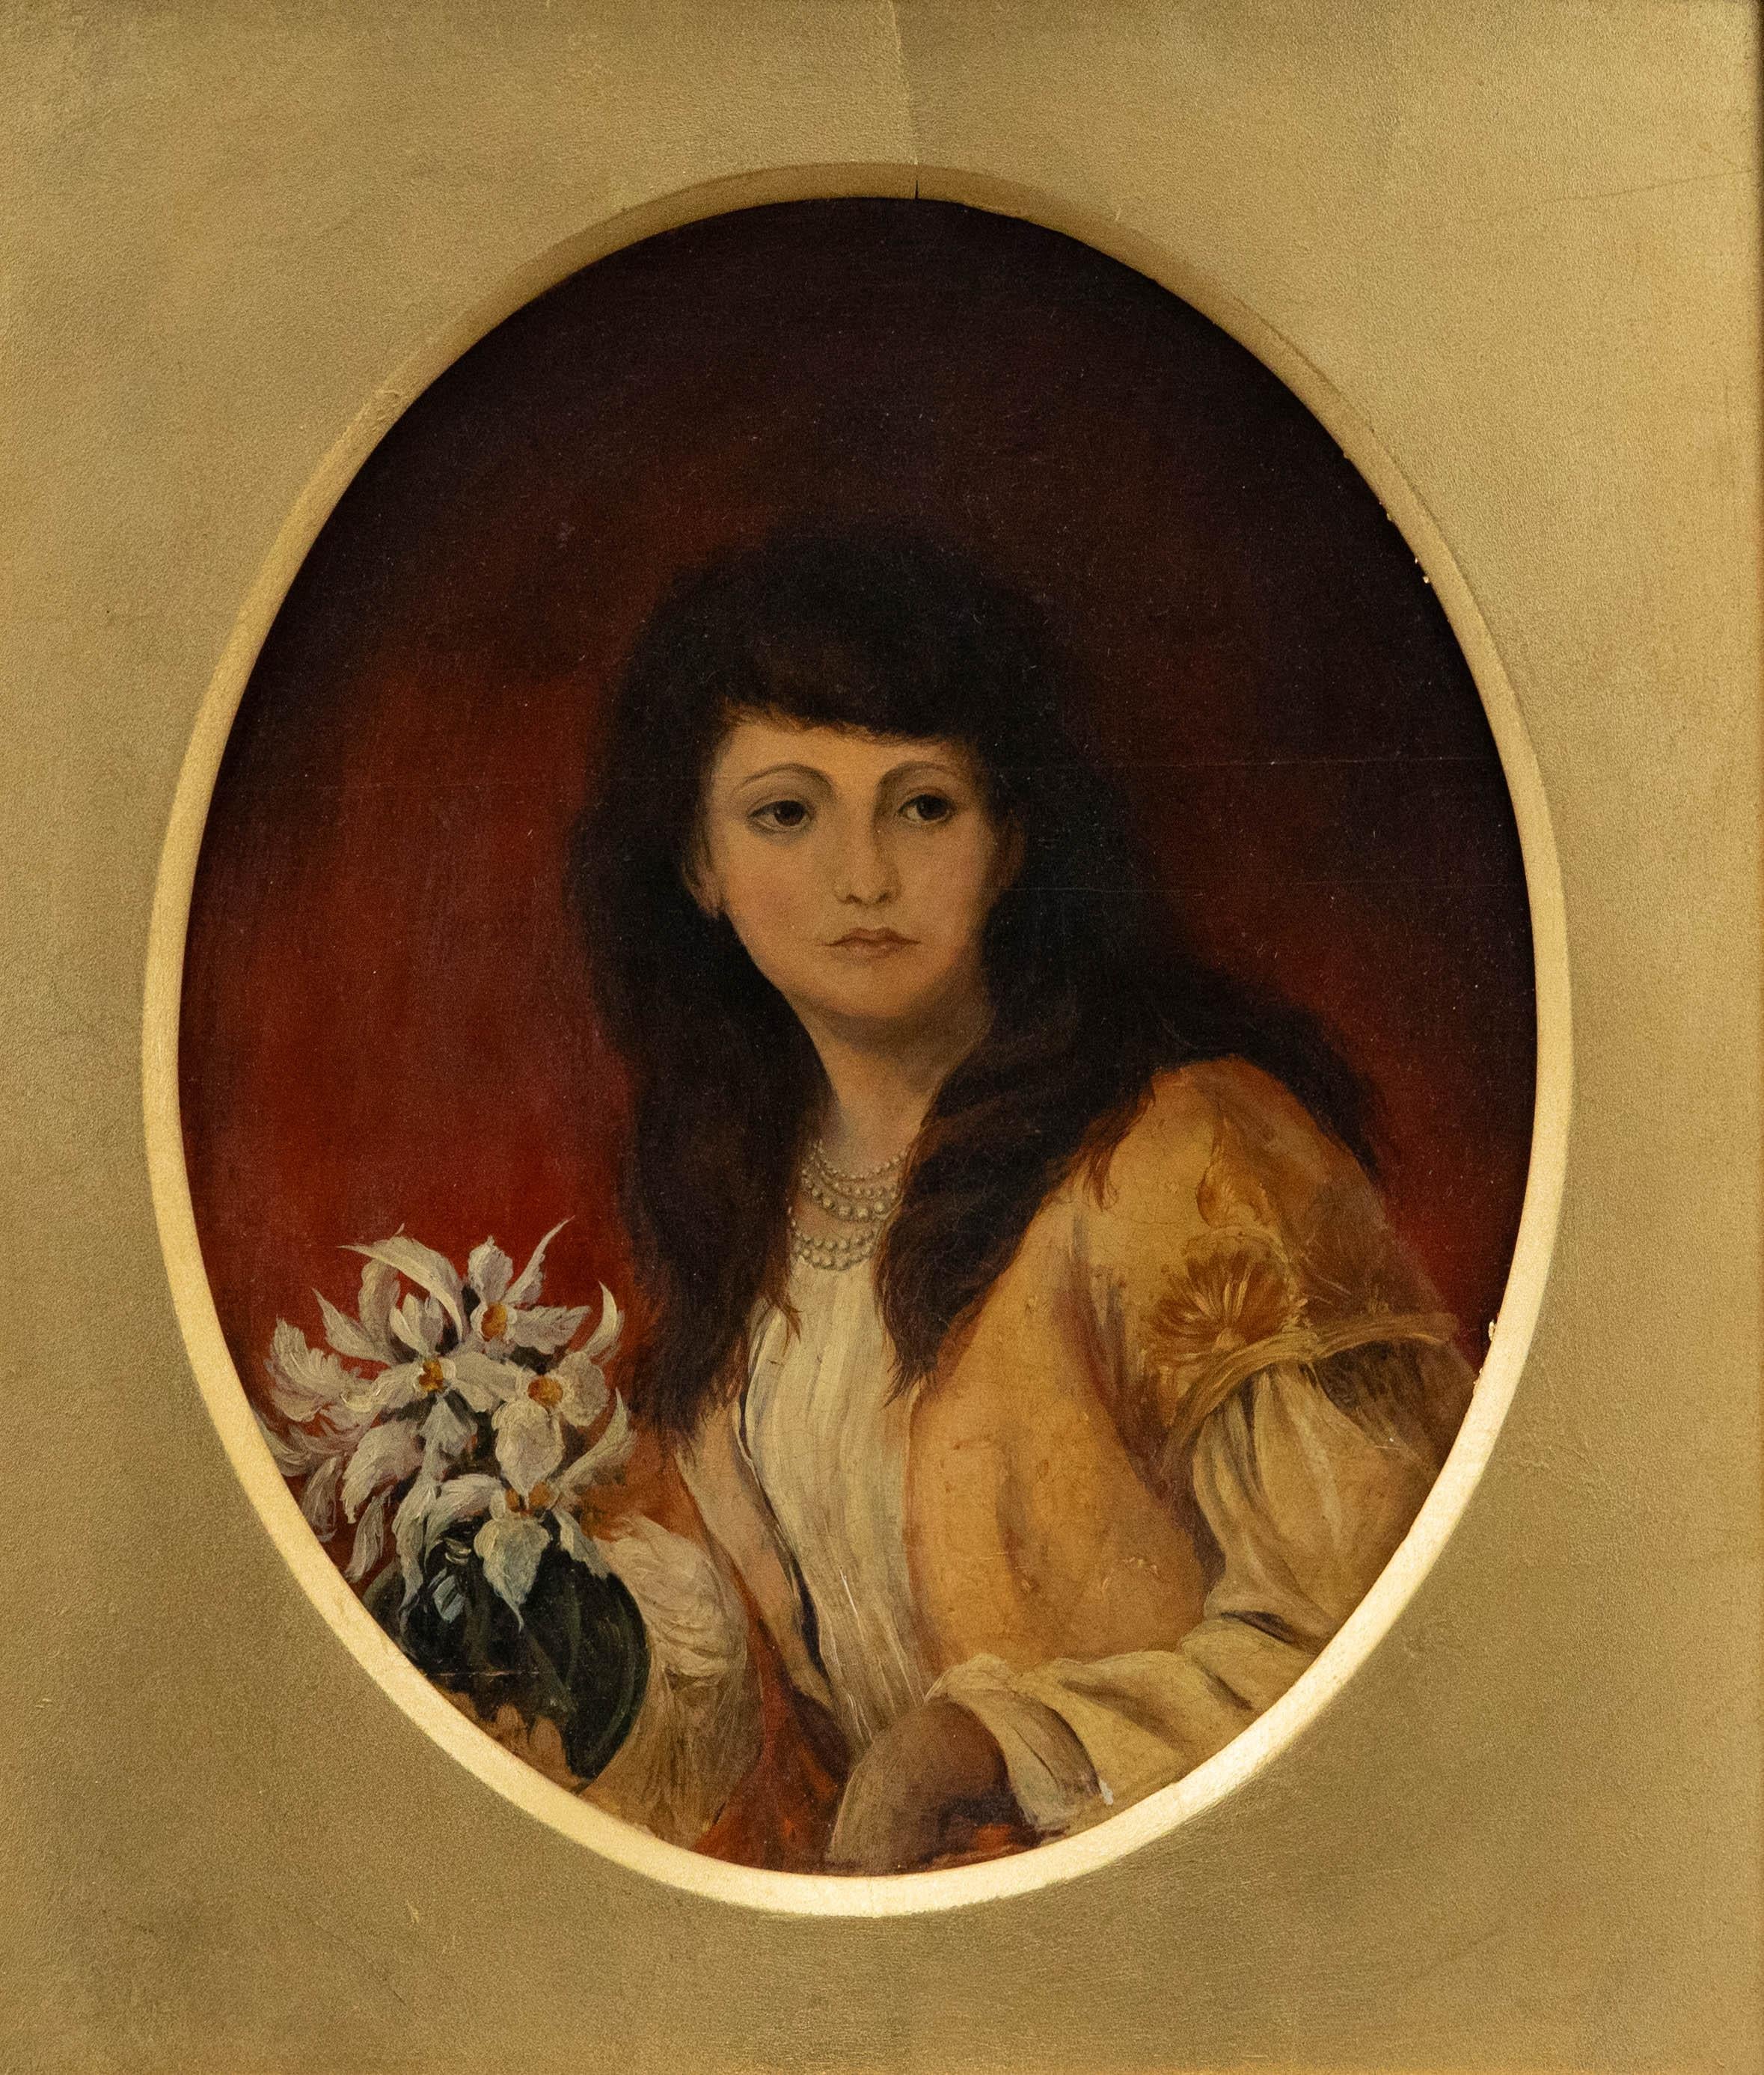 Unknown Portrait Painting - 19th Century Oil - Woman with White Irises